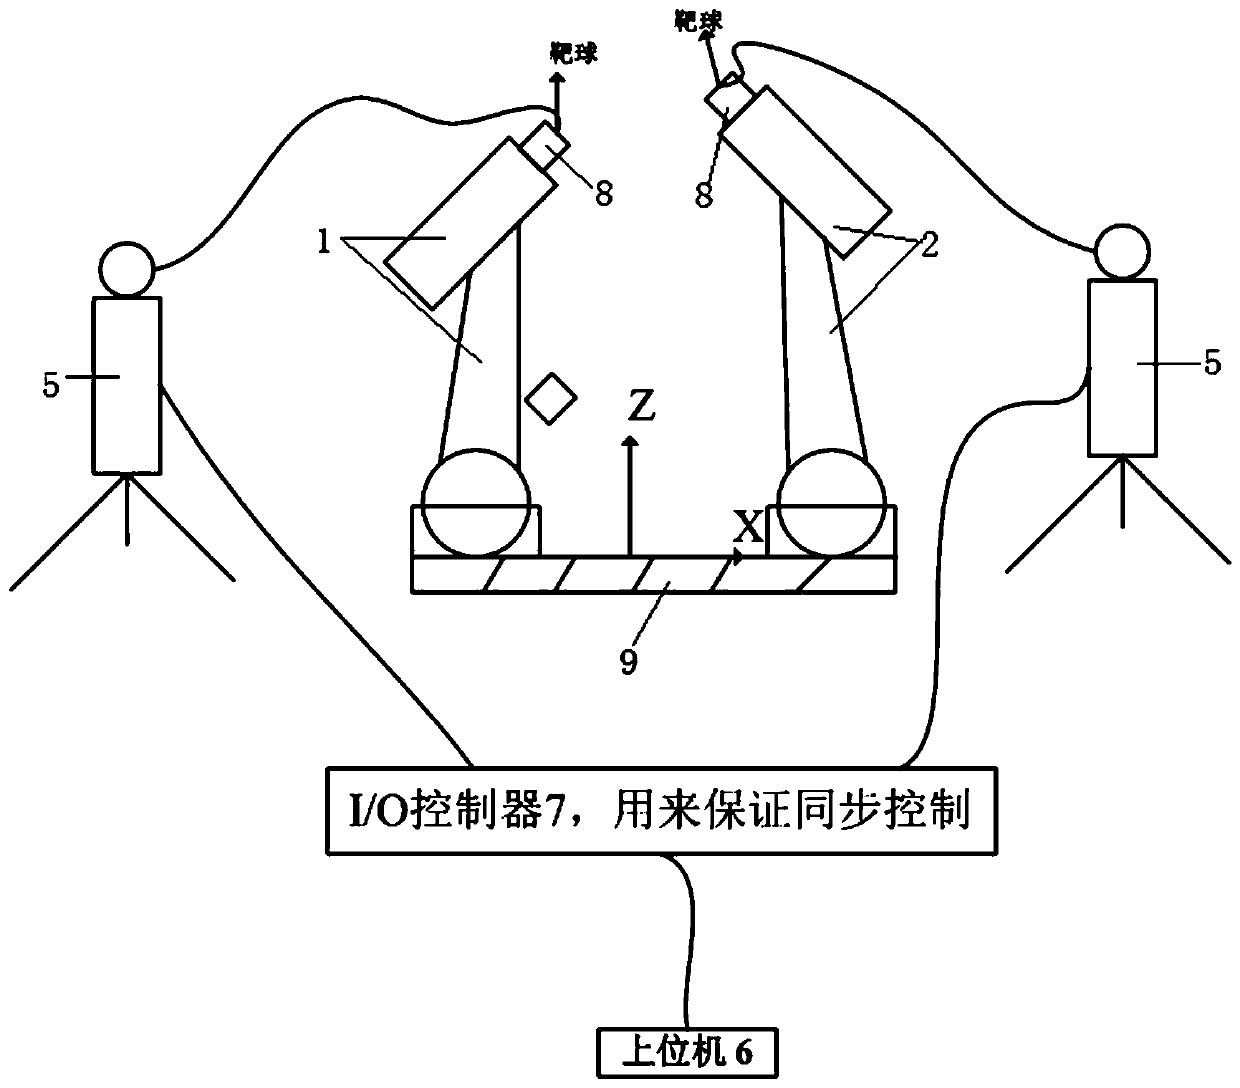 Double-arm robot performance measuring method based on multiple laser trackers